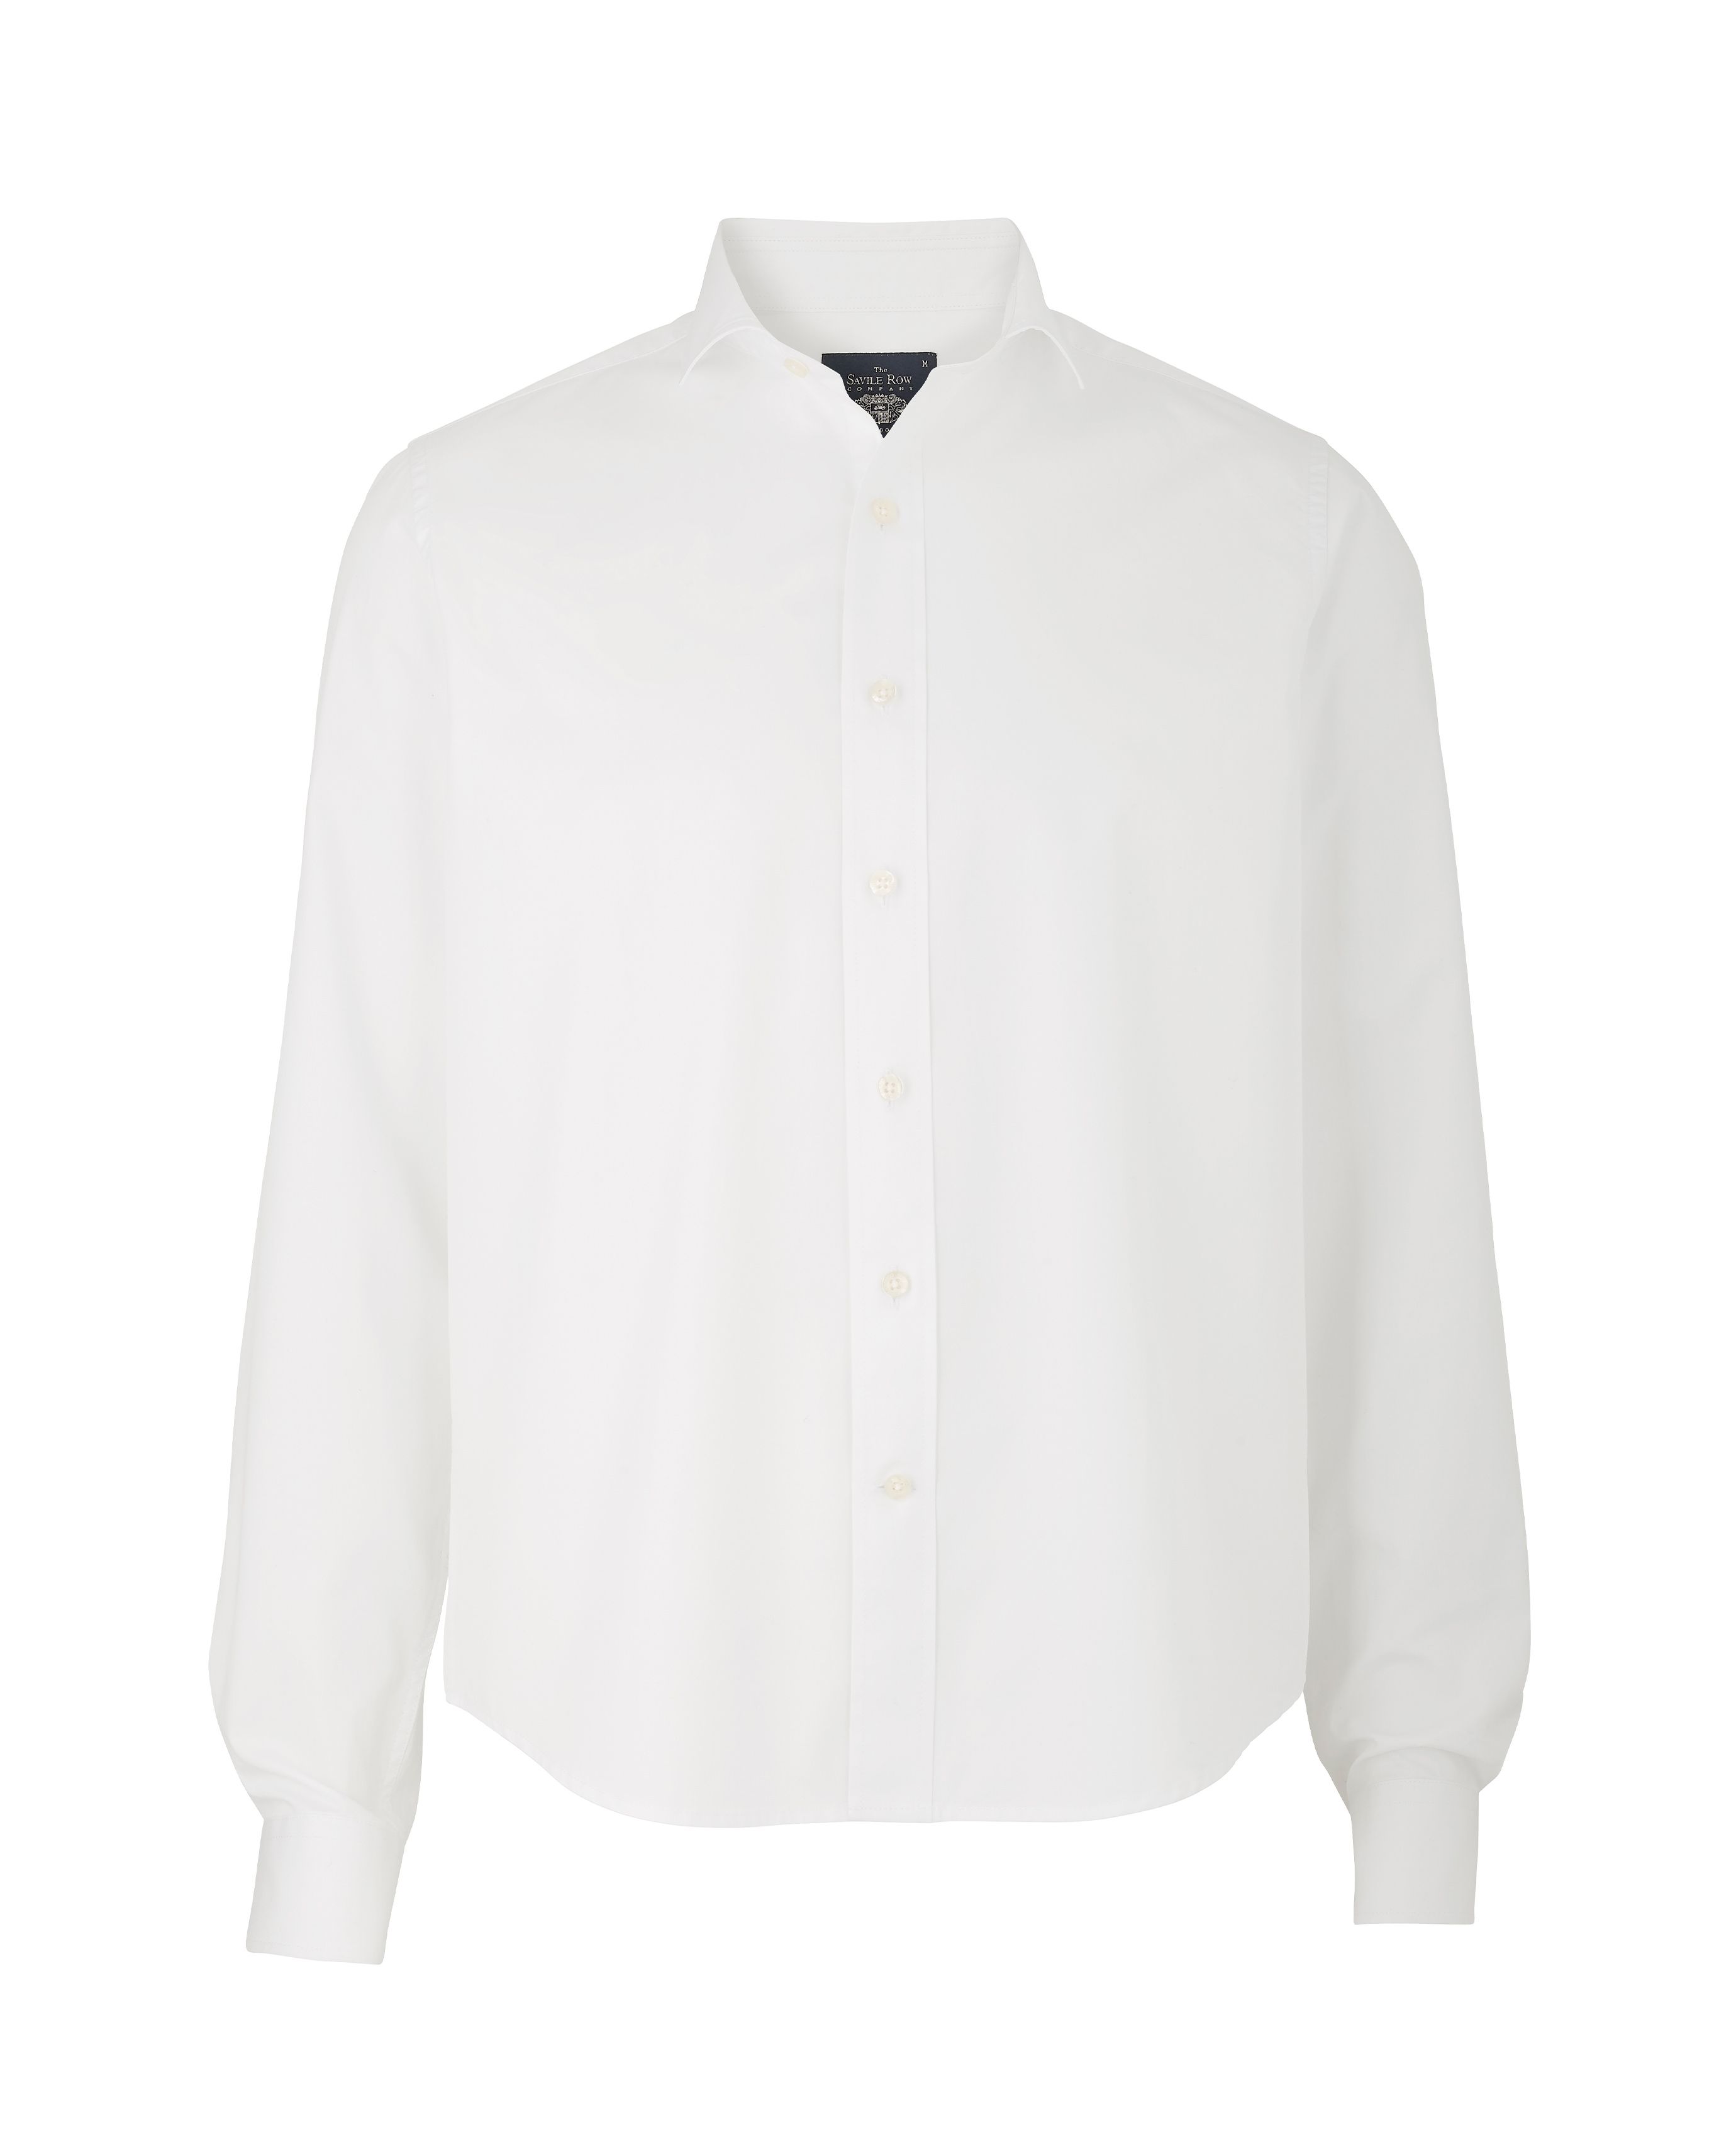 Men's White Cotton Twill Slim Fit Casual Shirt In Short Length | Savile ...